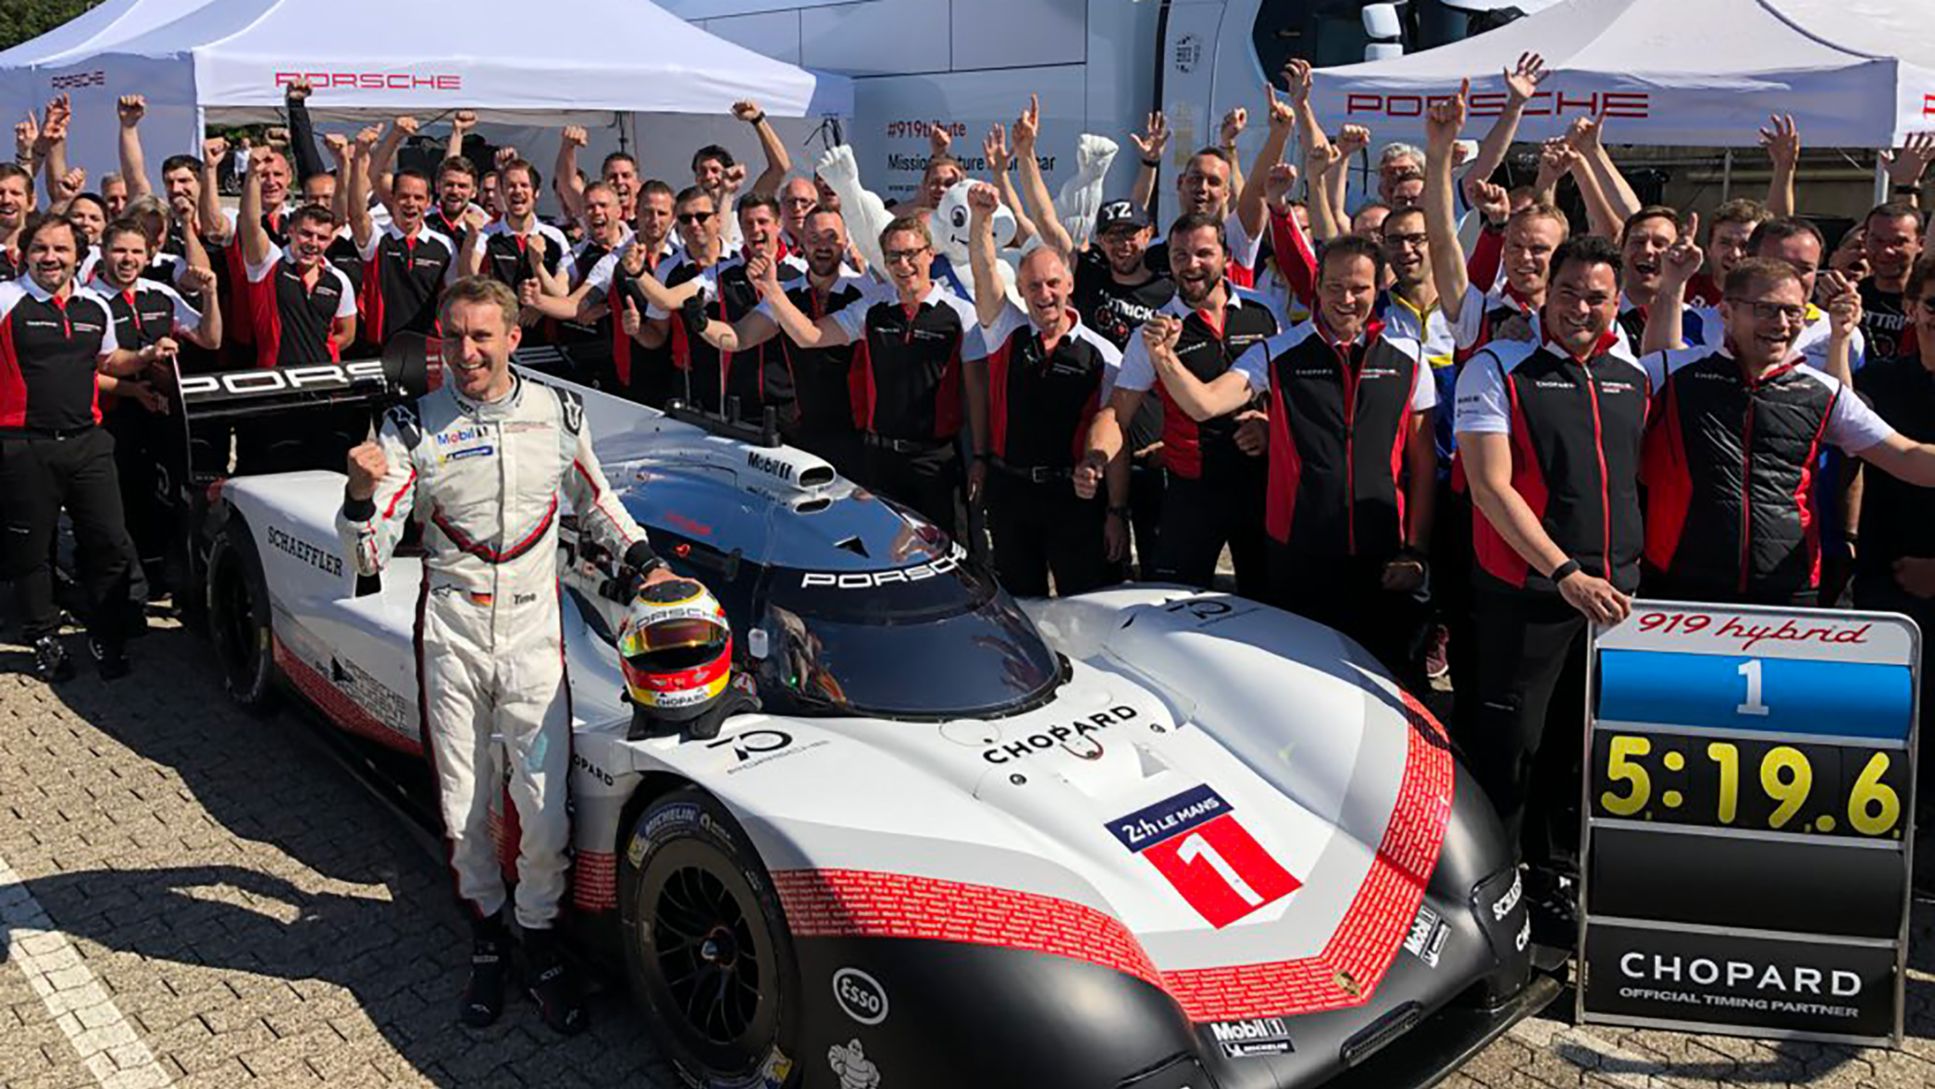 legering virkelighed industrialisere 5:19.55 minutes – Porsche 919 Hybrid Evo takes record in the “Green Hell” -  Porsche Newsroom